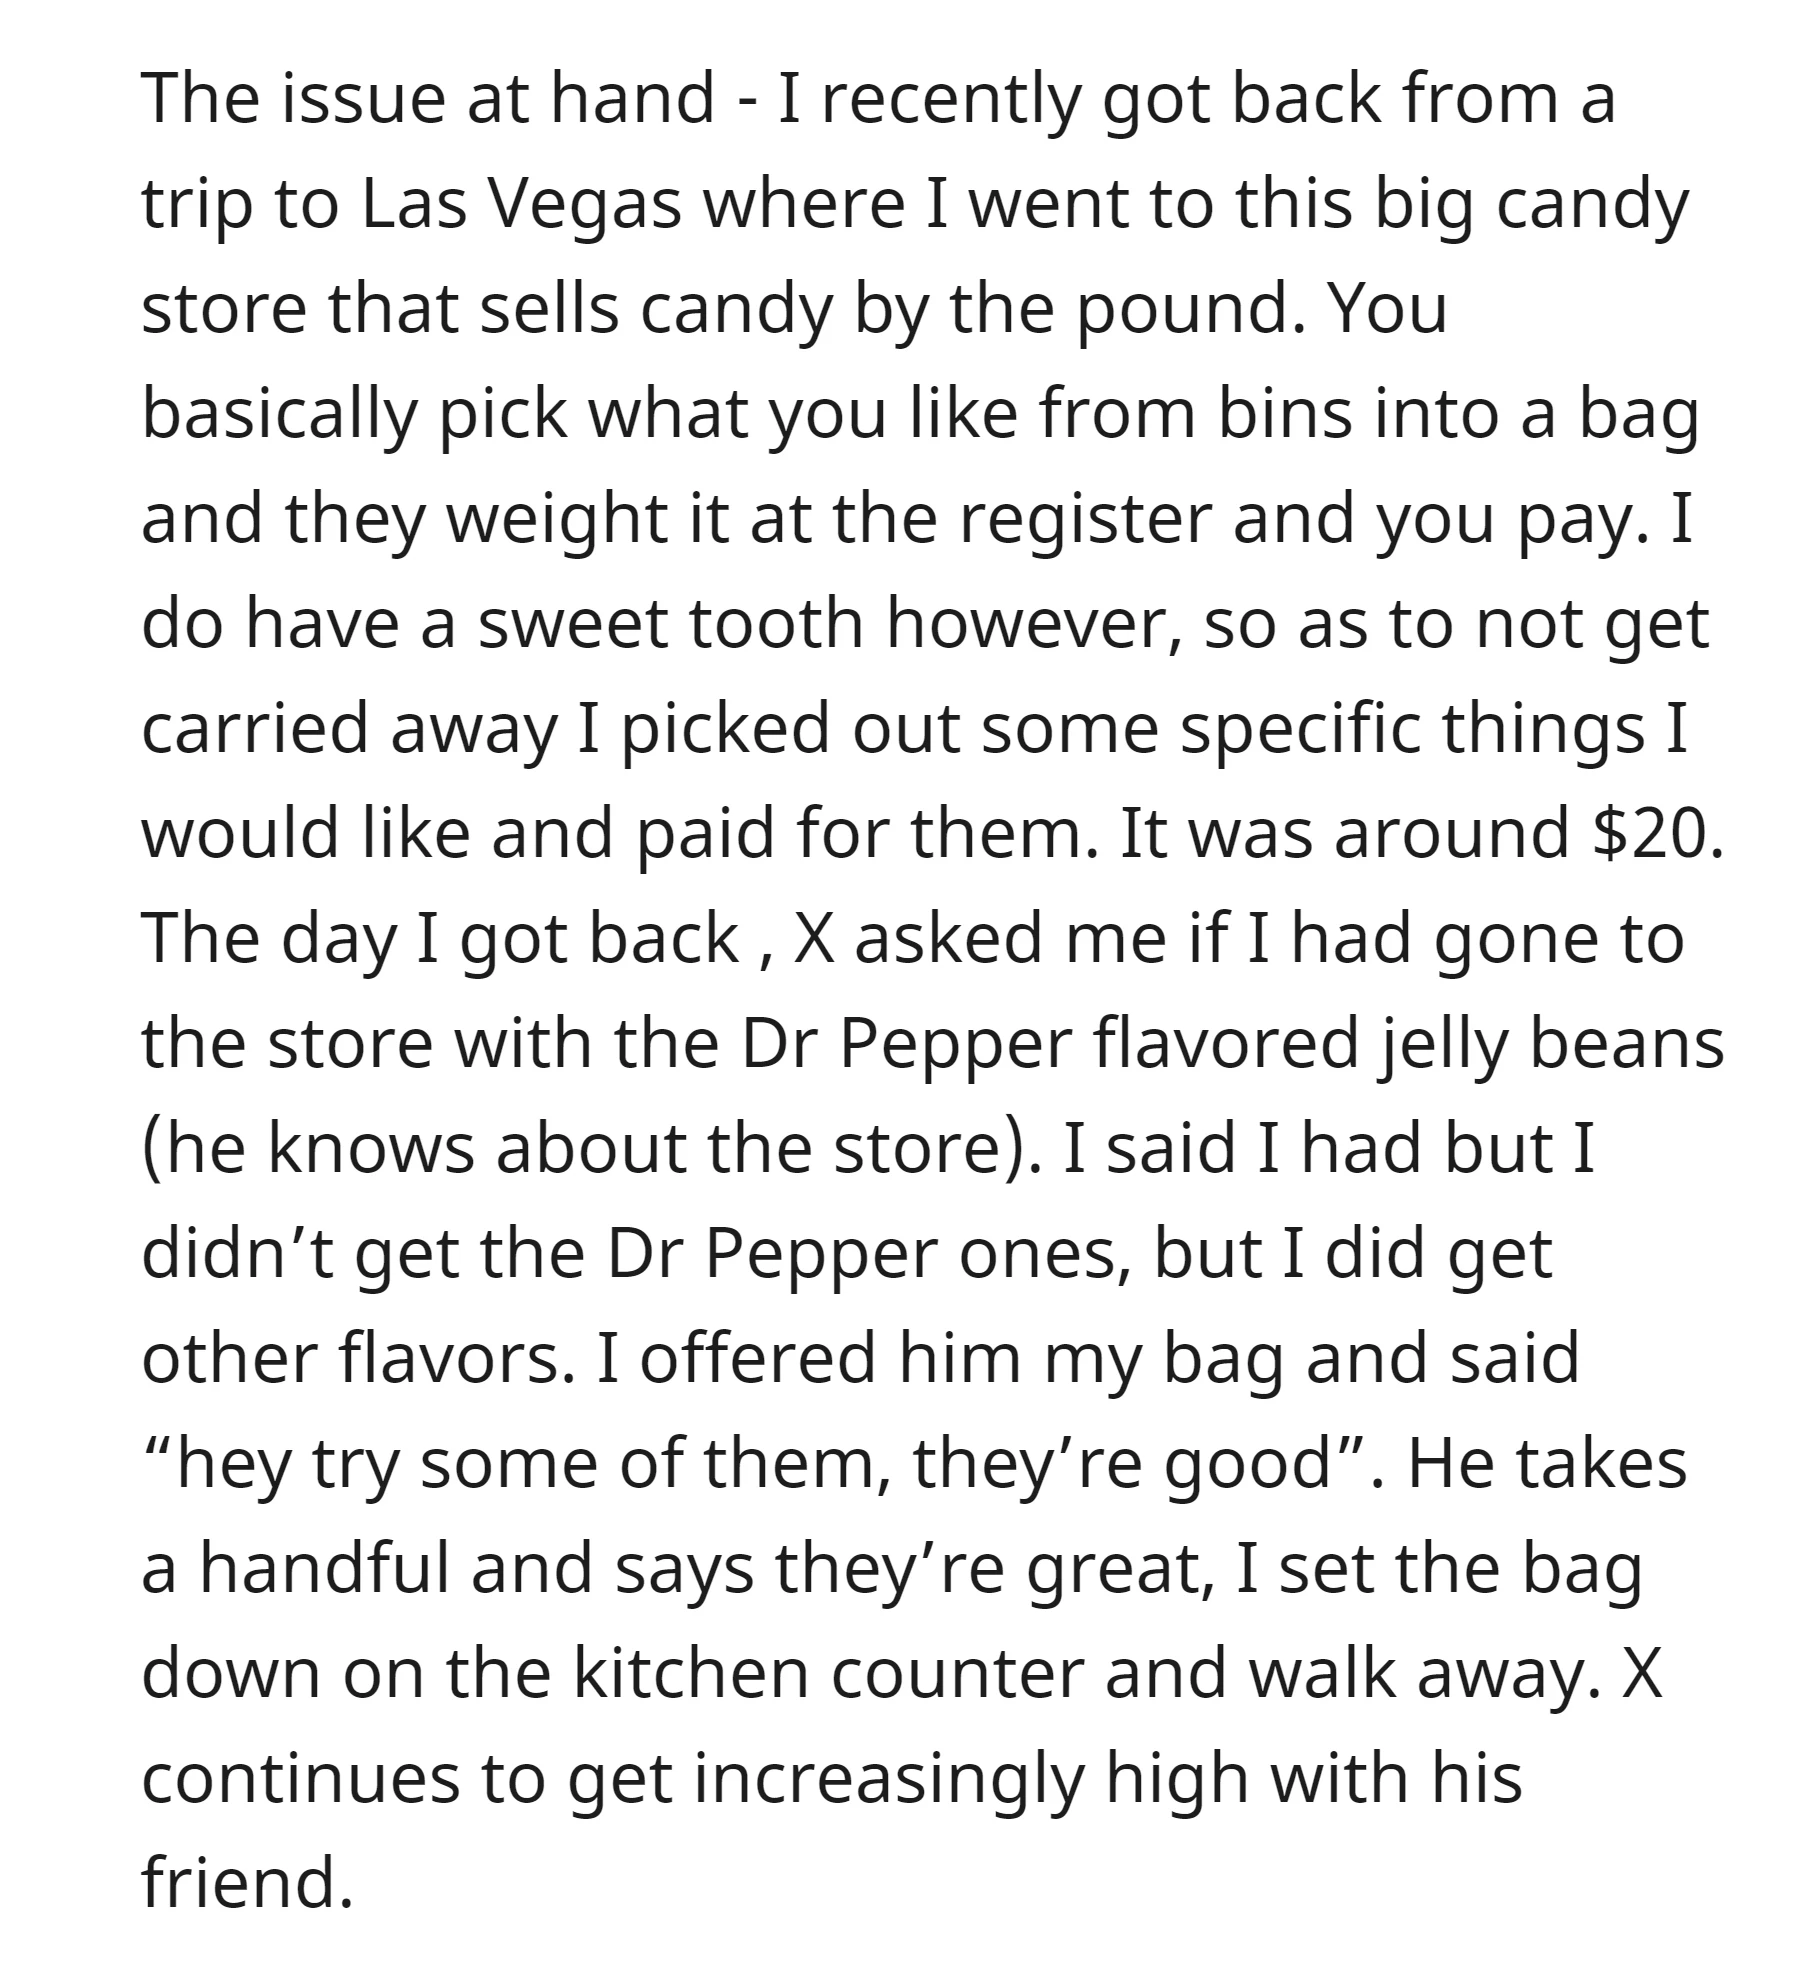 OP shared her candy haul with roommate, and she then left the candy unattended on the kitchen counter